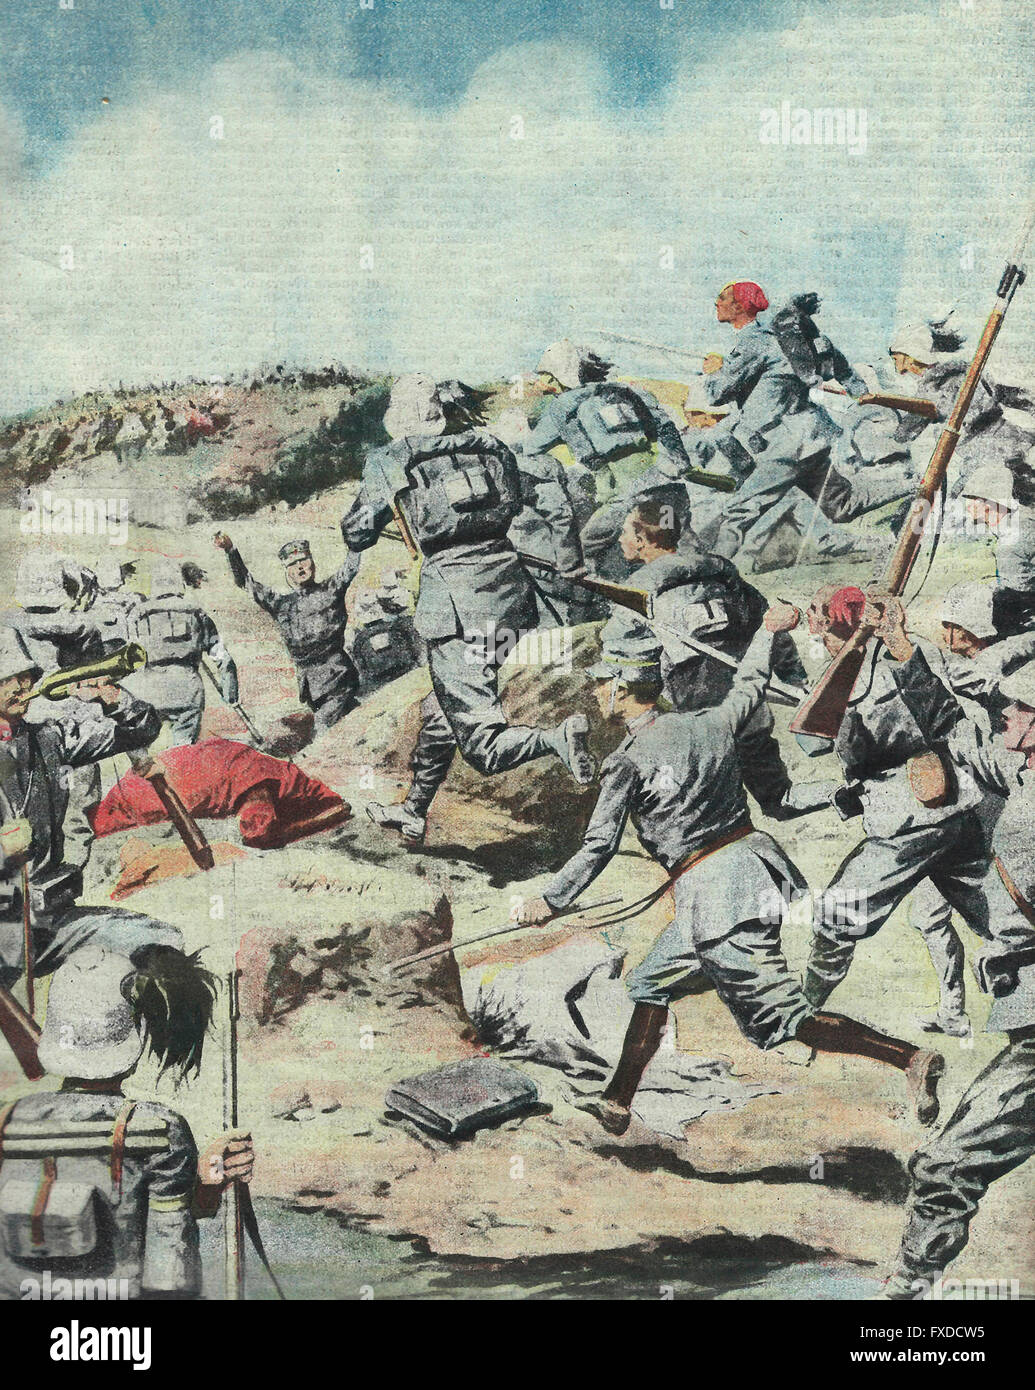 The Vittorio di Bu - Scimai : General Vinai troops occupy the last field after fighting and clearing the last field of the Senussi in Cyrenaica, 1913 Stock Photo